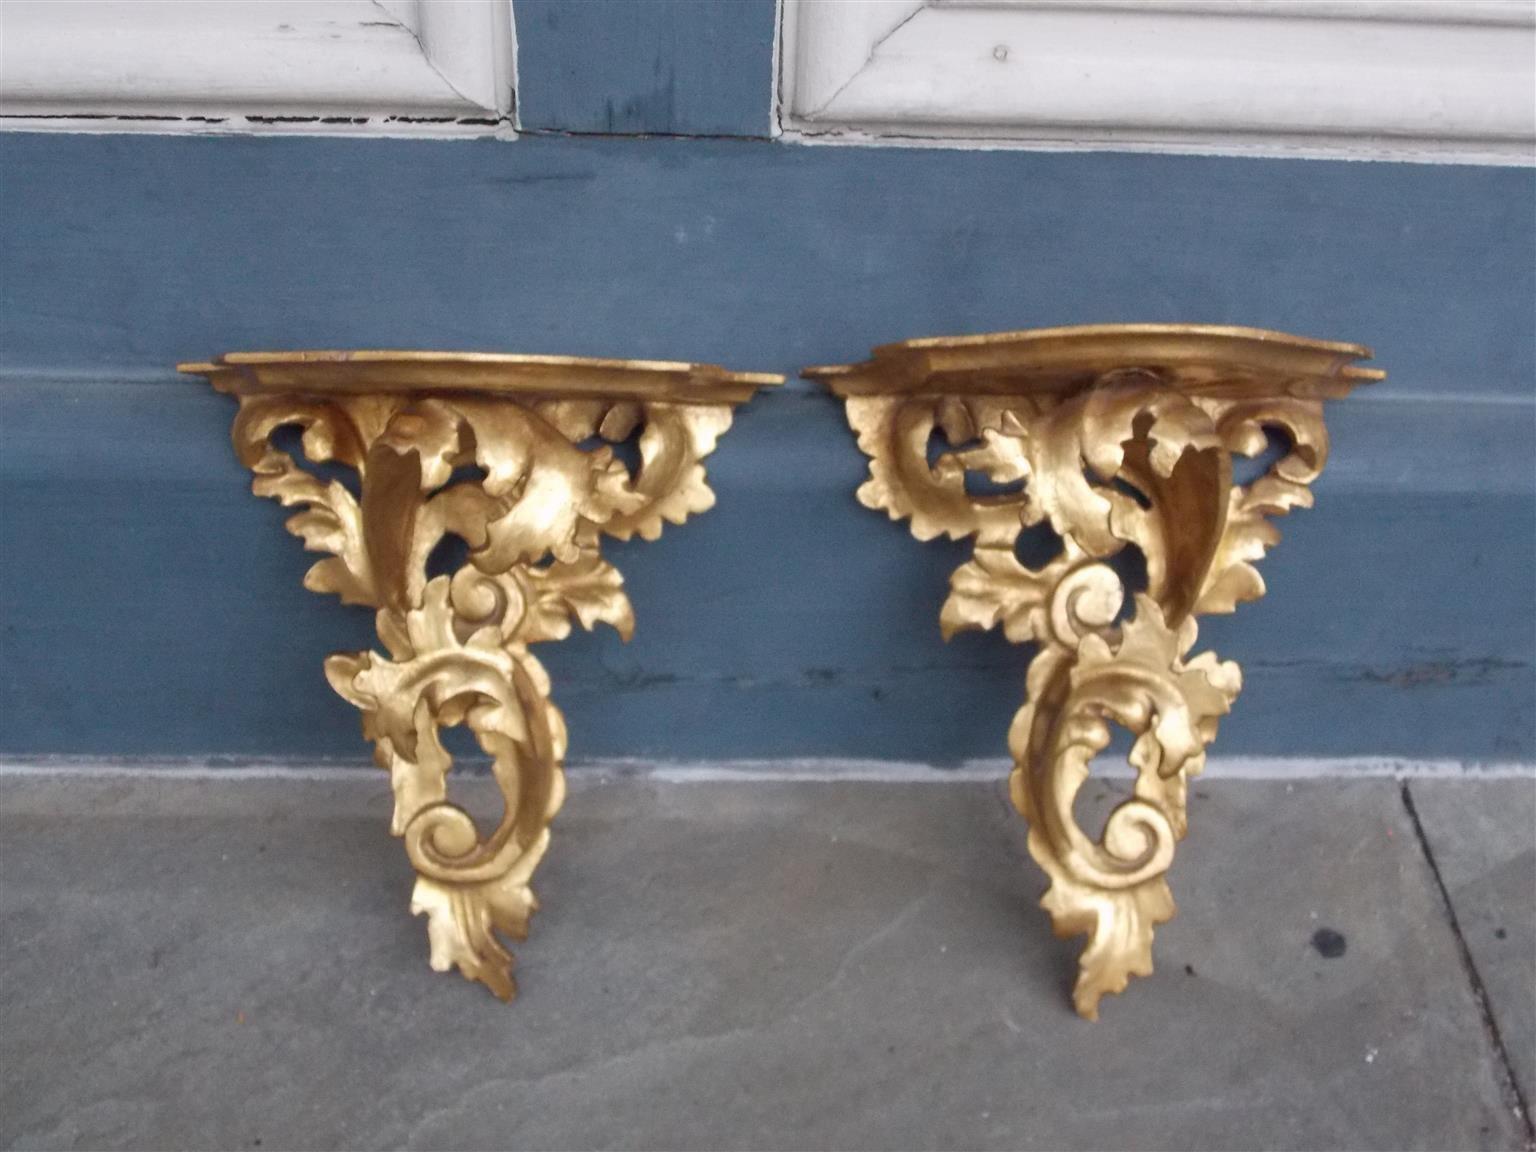 Pair of French gilt carved wood and gesso floral scrolled wall brackets with scalloped shelving, Mid-19th century.